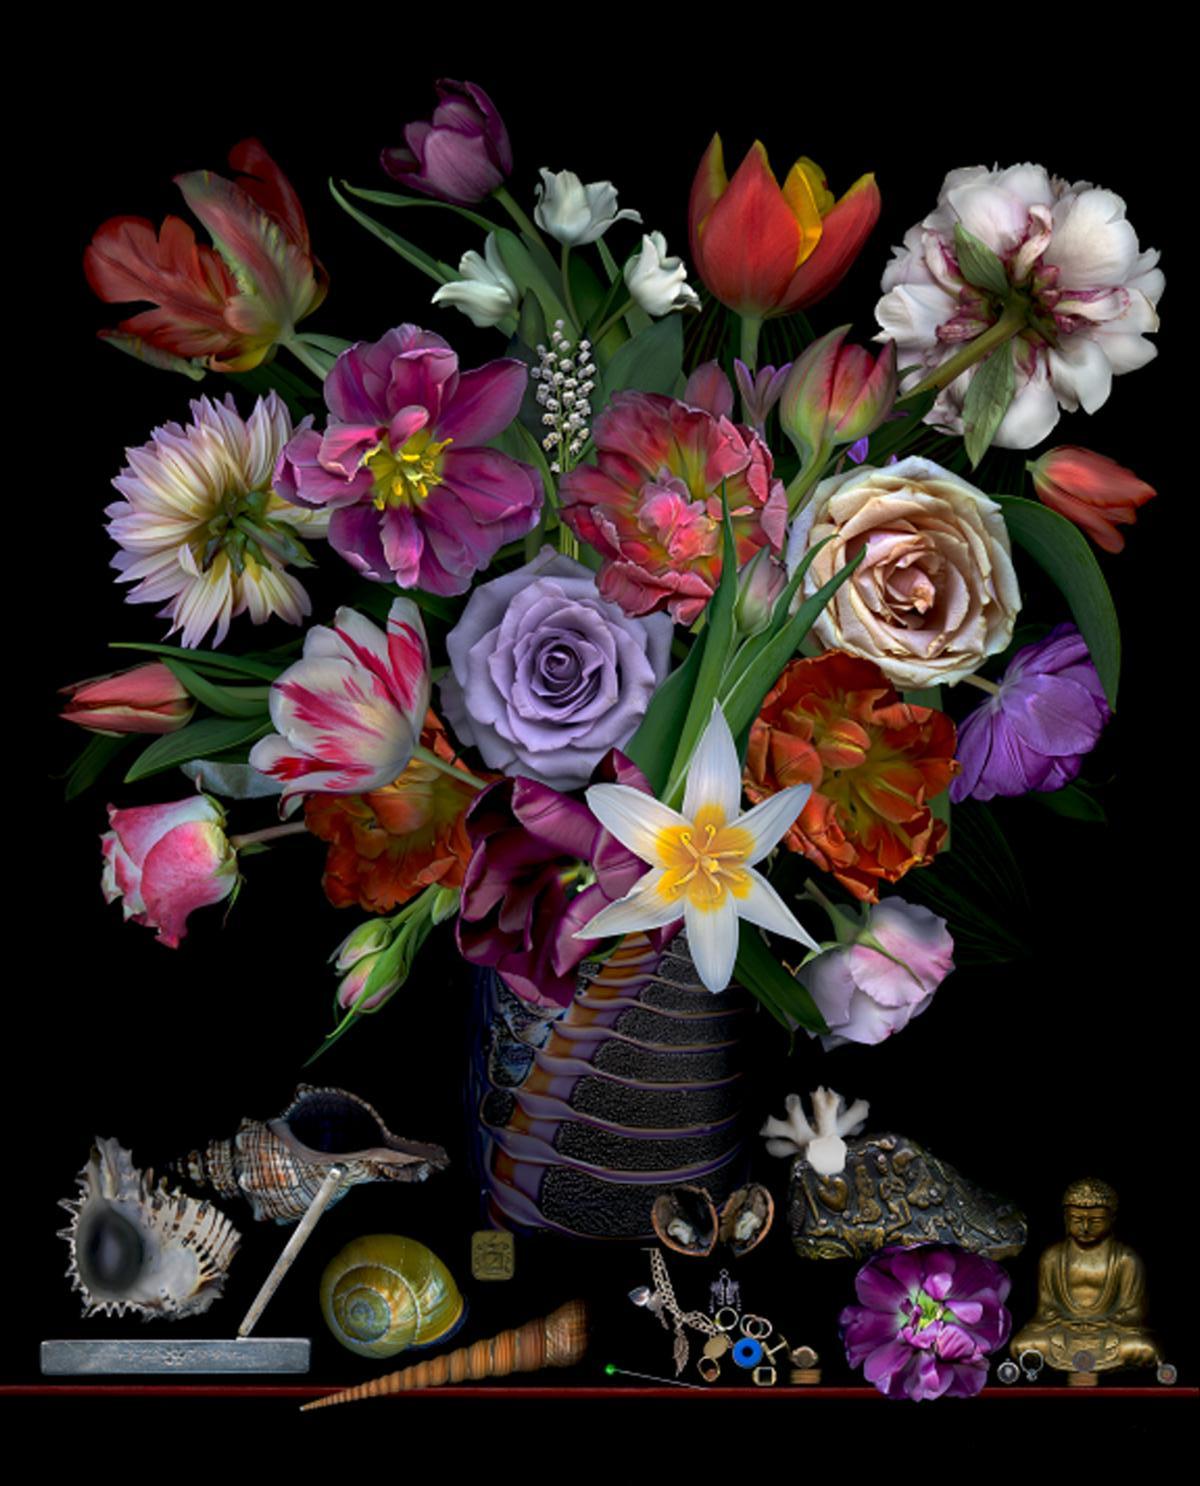 Zoltan Gerliczki Still-Life Photograph - Still Life with Shells. Flowers. Digital Collage Color Photograph